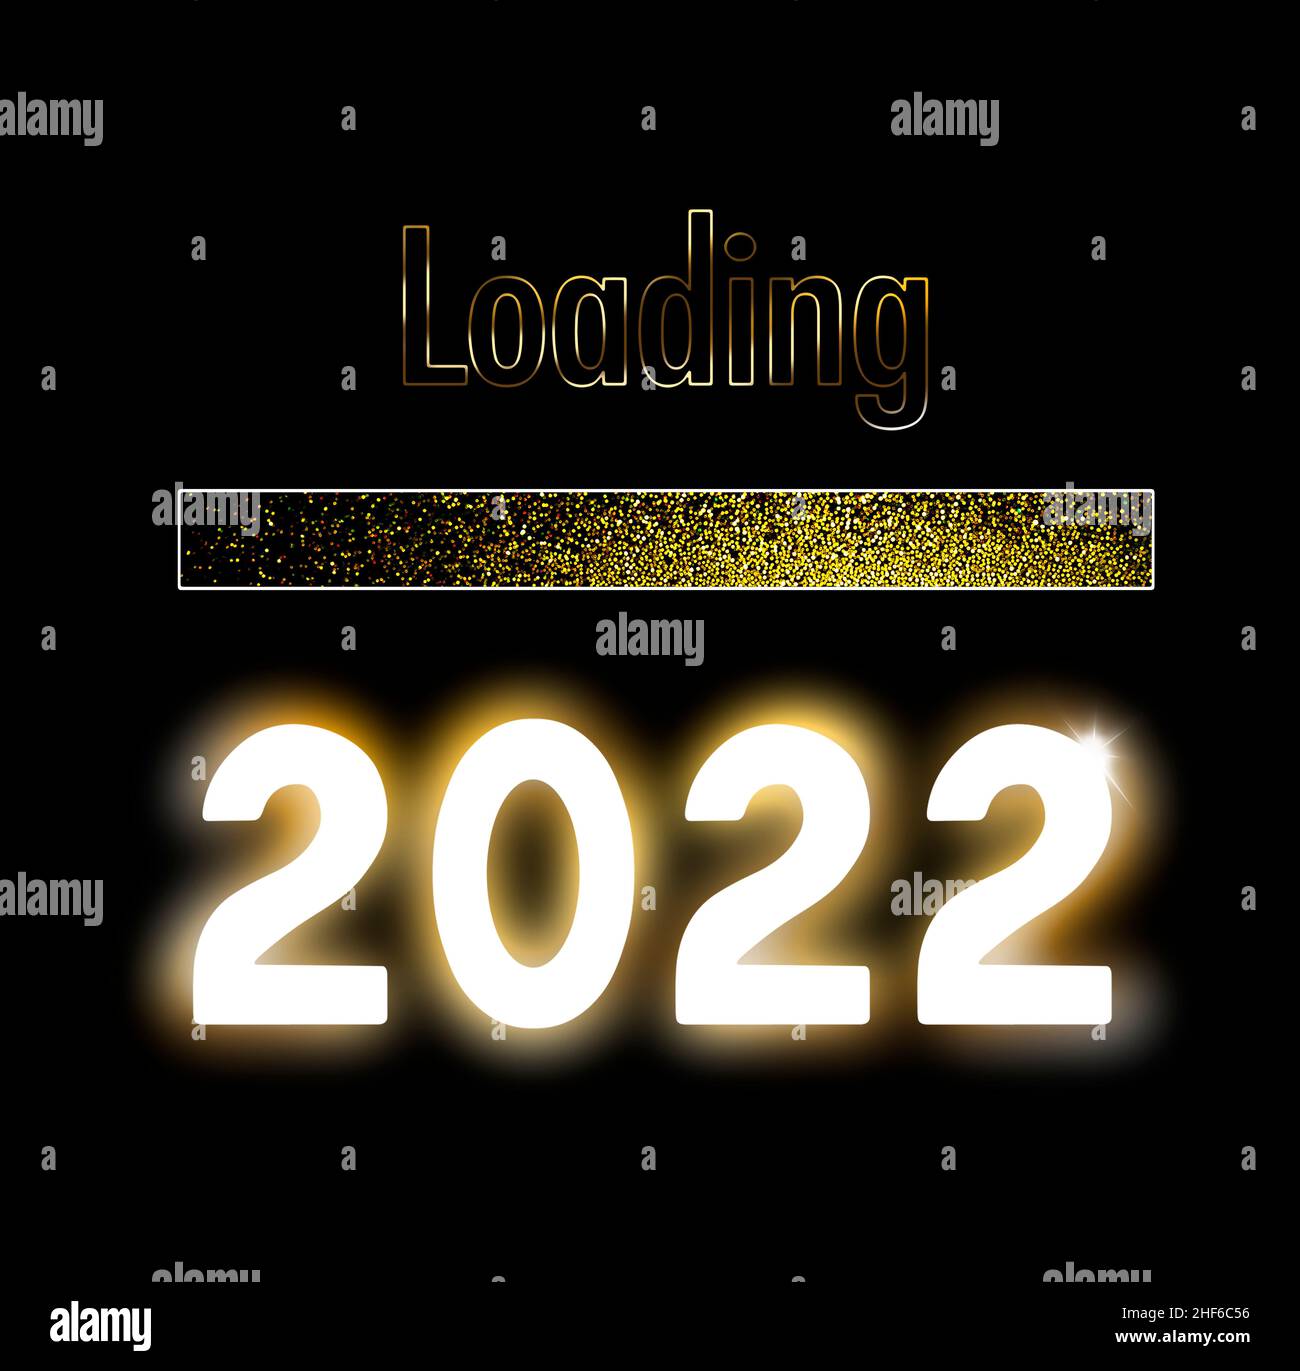 Loading bar with golden glitter for the start of the New Year 2022 Stock Photo